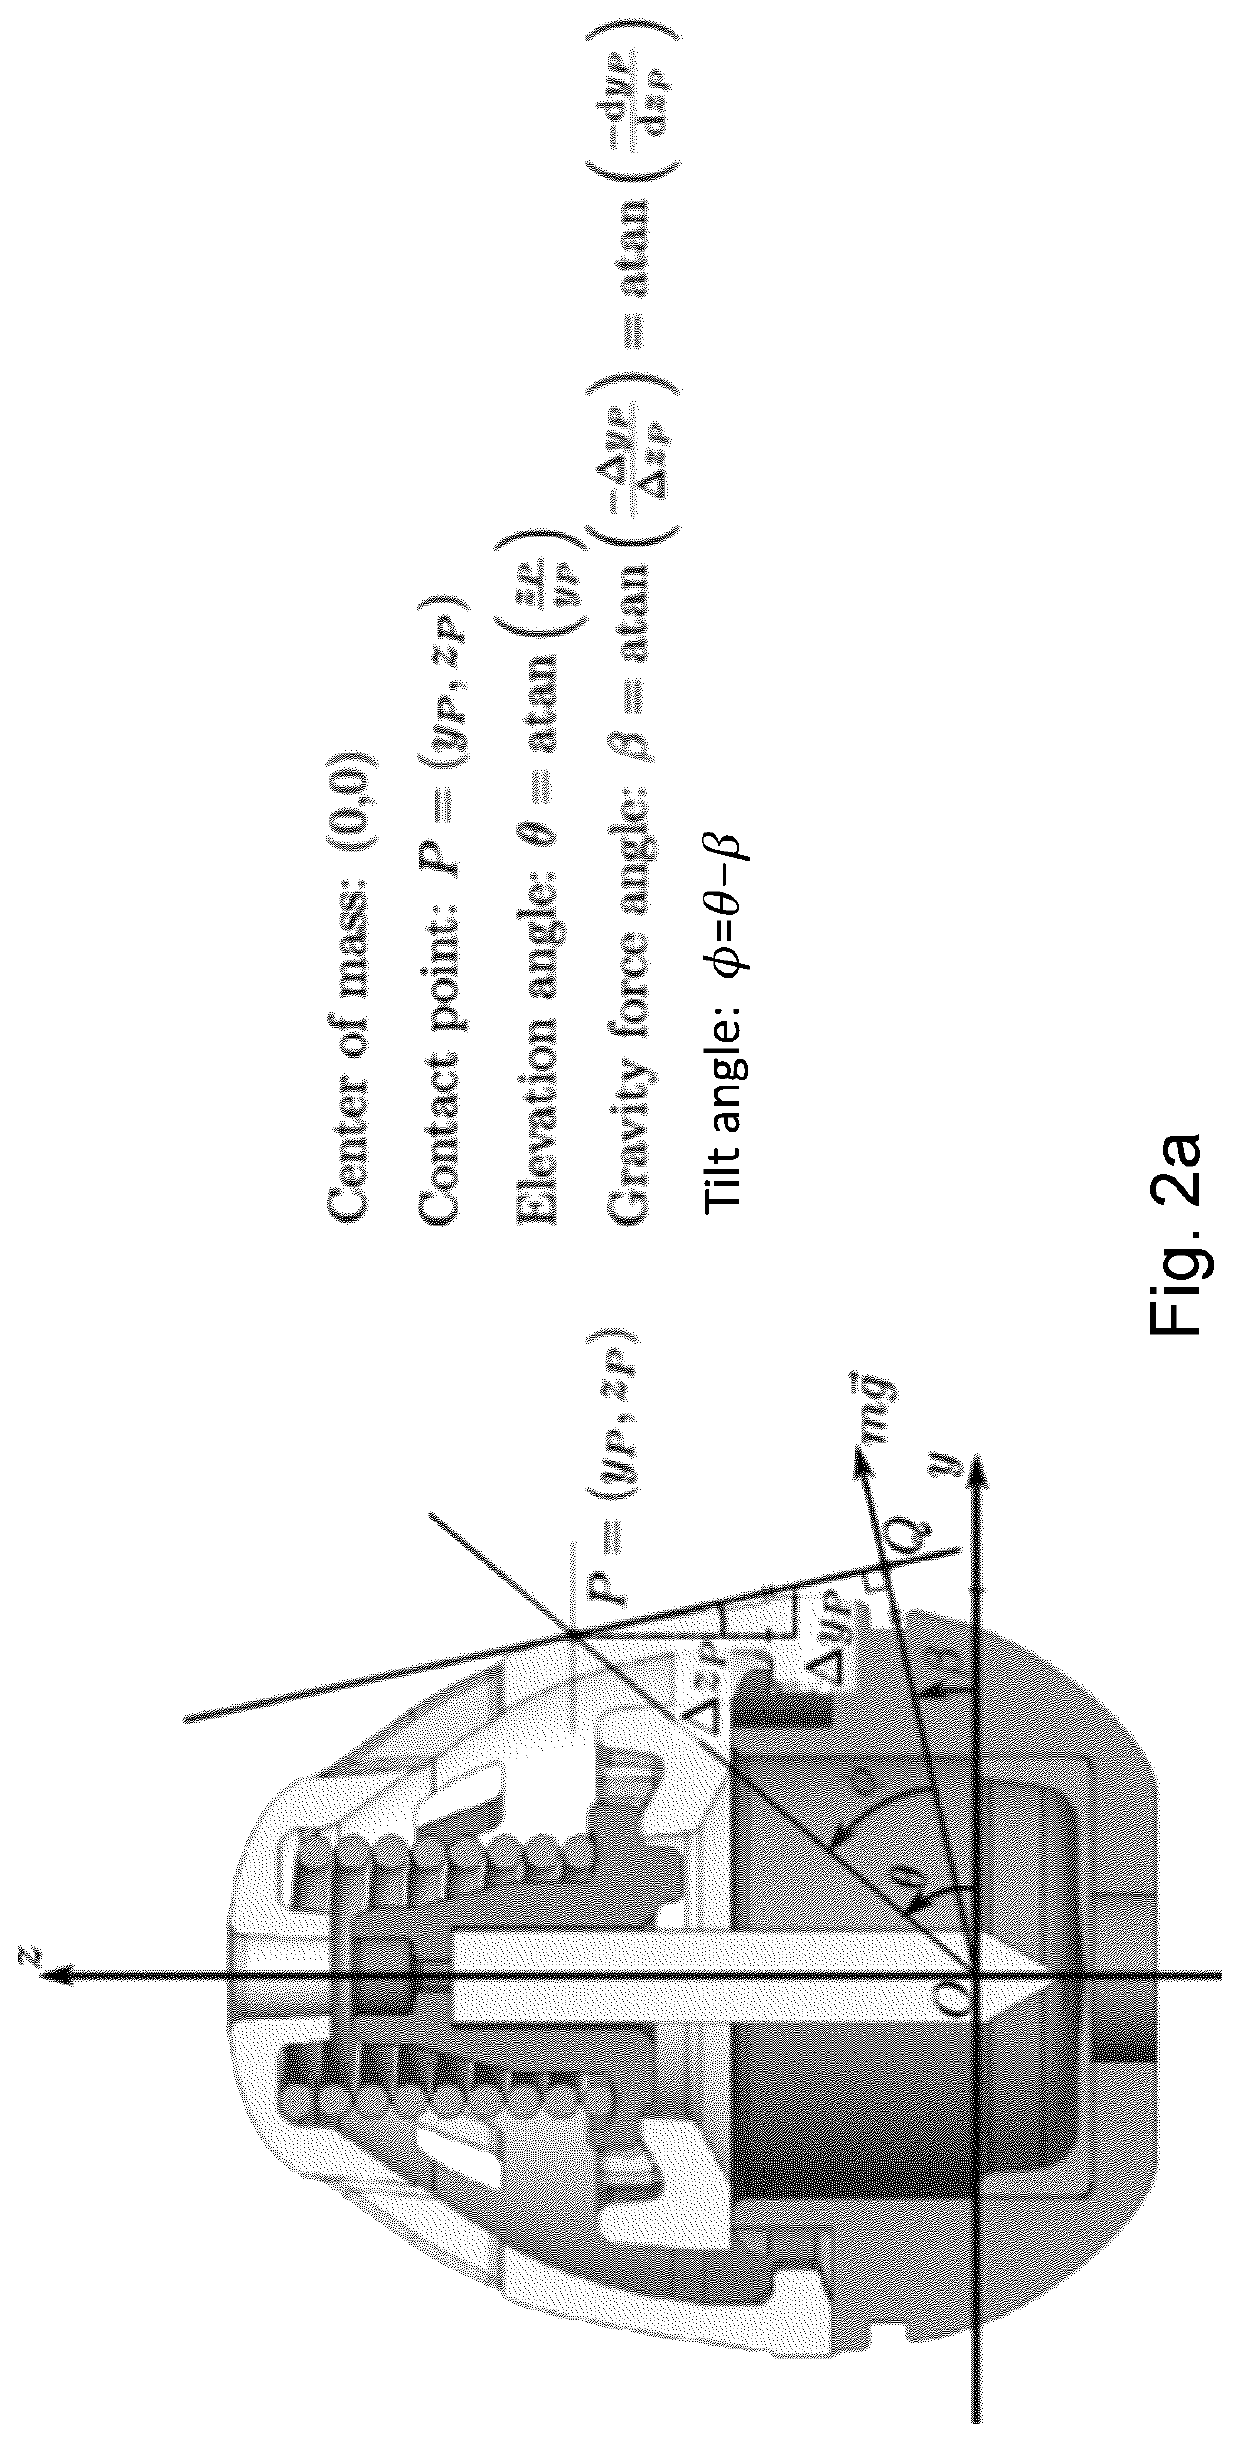 Capsule device having improved self-righting ability